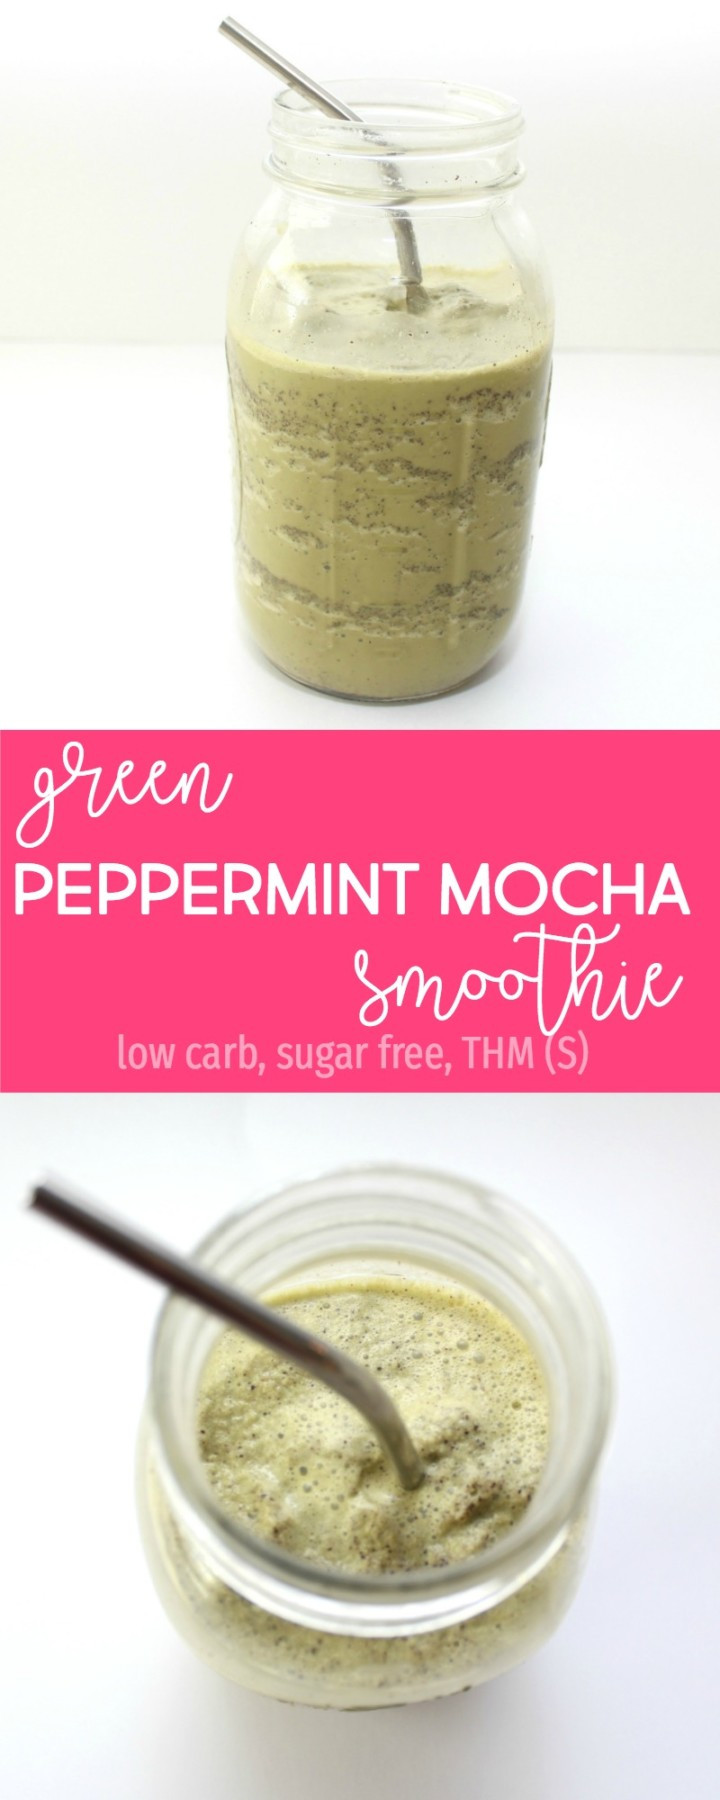 Trim Healthy Mama Smoothie Recipes
 green peppermint mocha smoothie recipe My Chocolate Moments